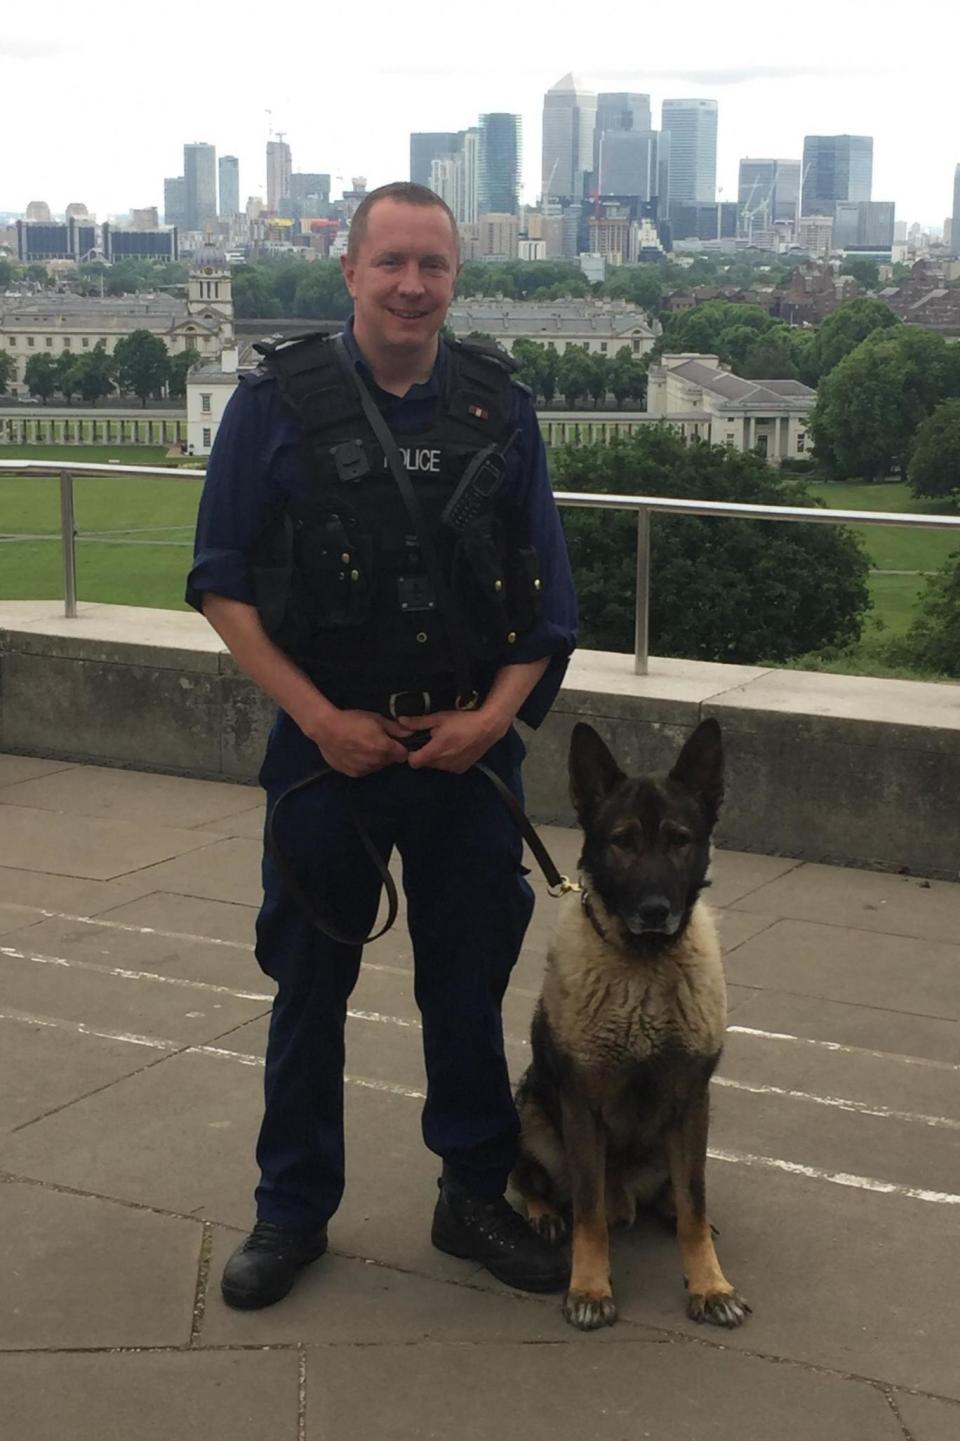 Heroic: PC Dobson with his dog Monty